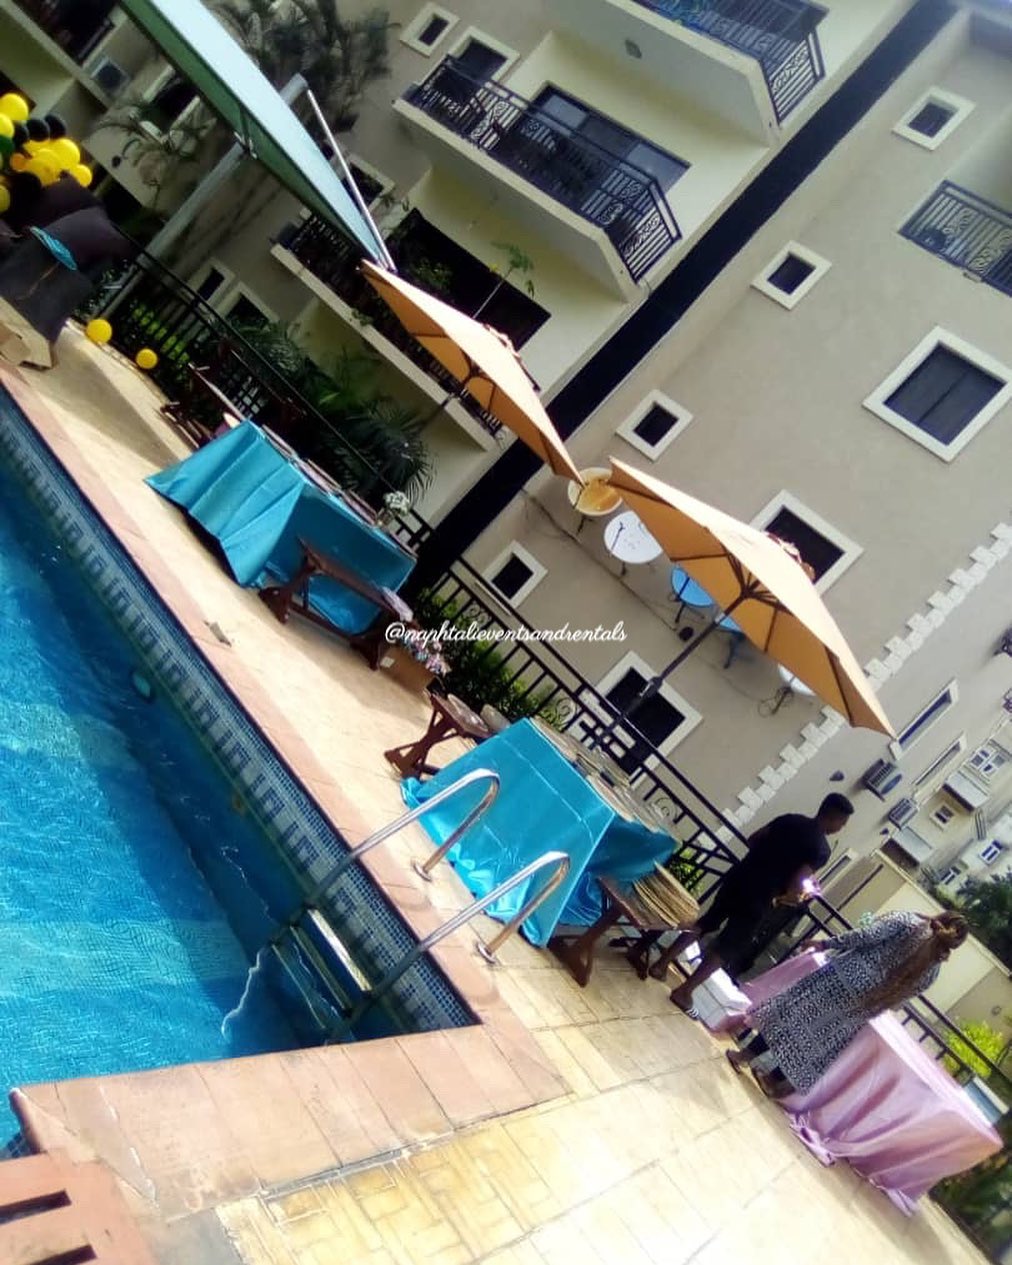 157179472 430558924685717 8273697739018286253 n - Yet another angle of a simple pool party setup by @naphtalieventsandrentals. 

Affordable way to enj...